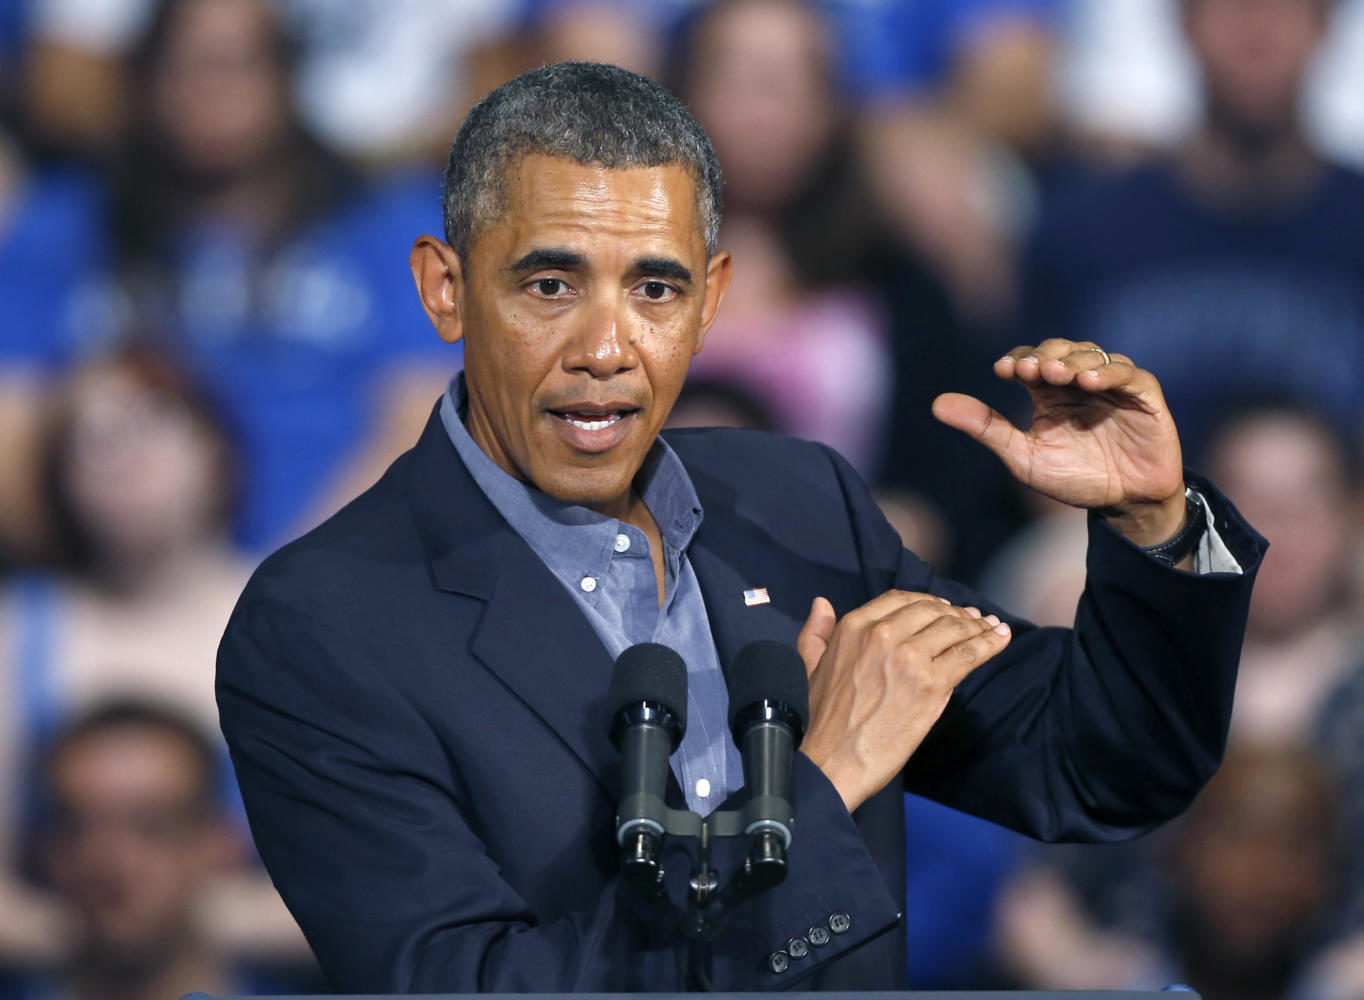 President Barack Obama gestures as he speaks at the University at Buffalo, the State University of New York, Thursday, Aug. 22, 2013 in Buffalo, N.Y., where he began his two day bus tour to speak about college financial aid. (AP Photo/Keith Srakocic)